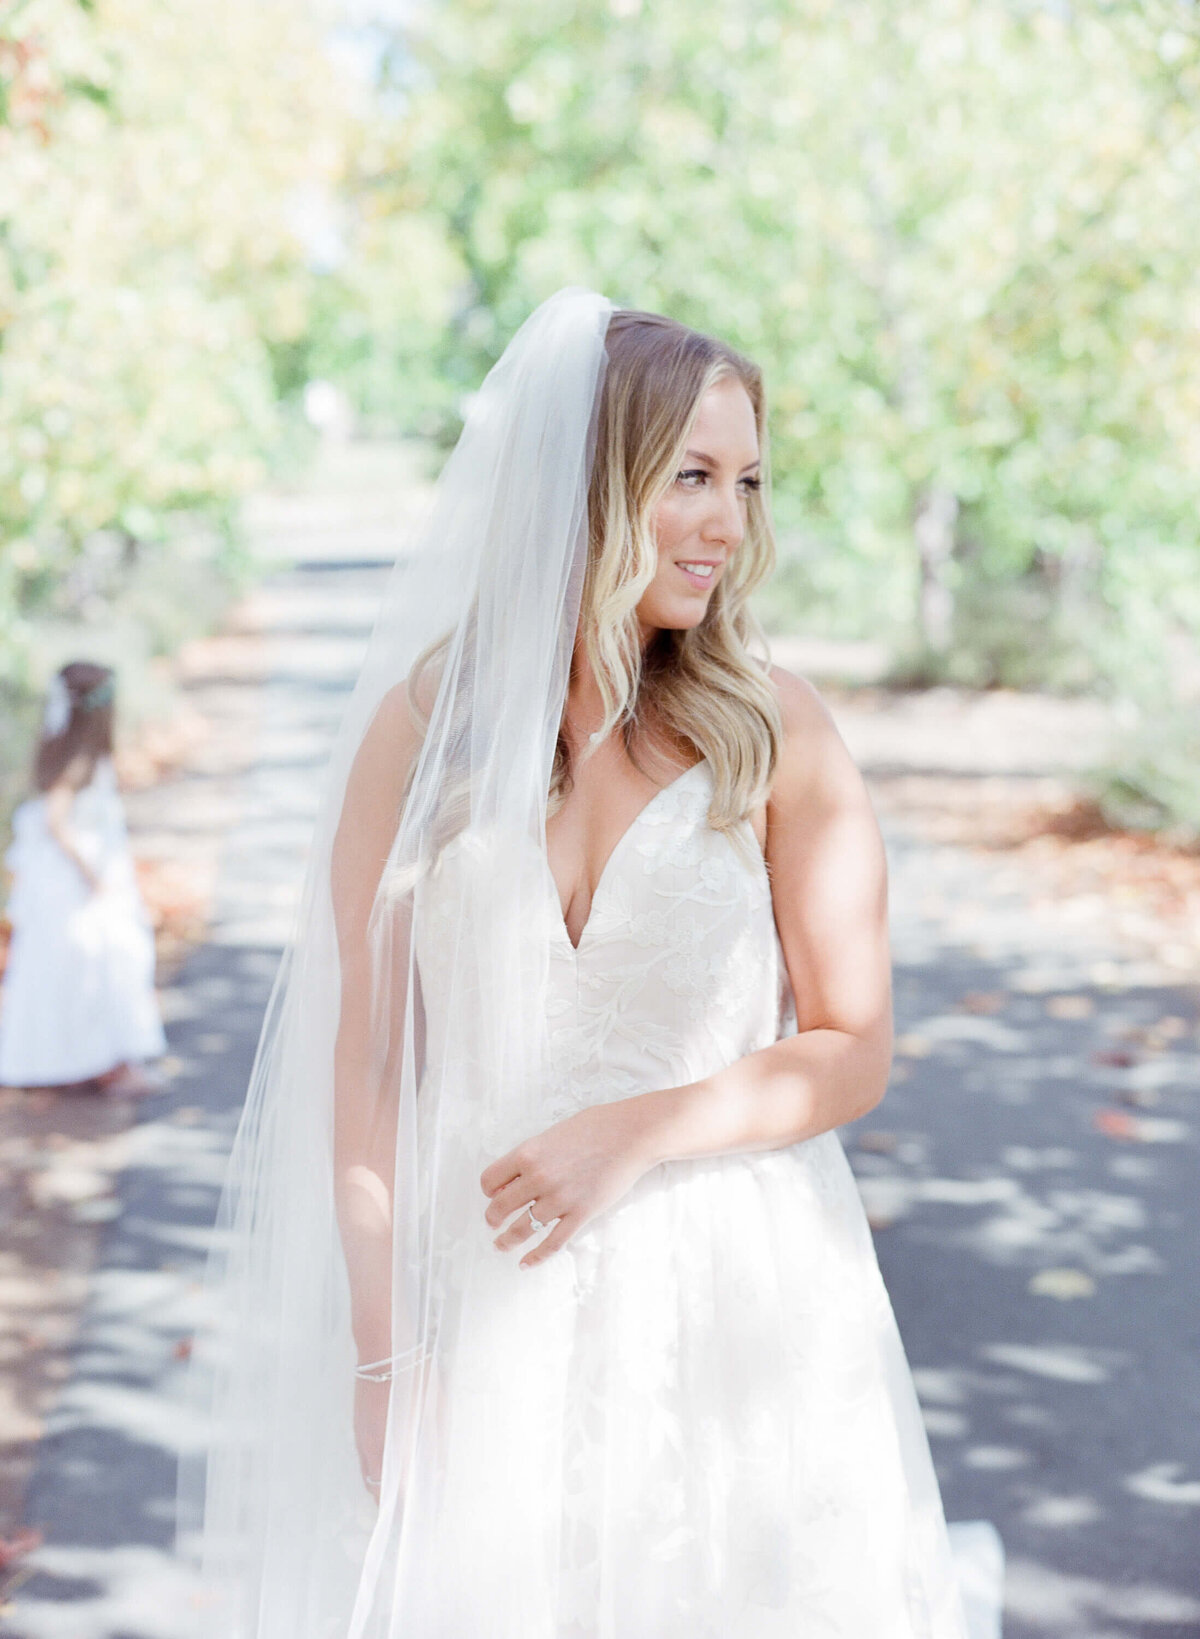 Beautiful bride with blond hair poses for the camera in her wedding ring and a veil on her head. Warm radiating greenery in the background.